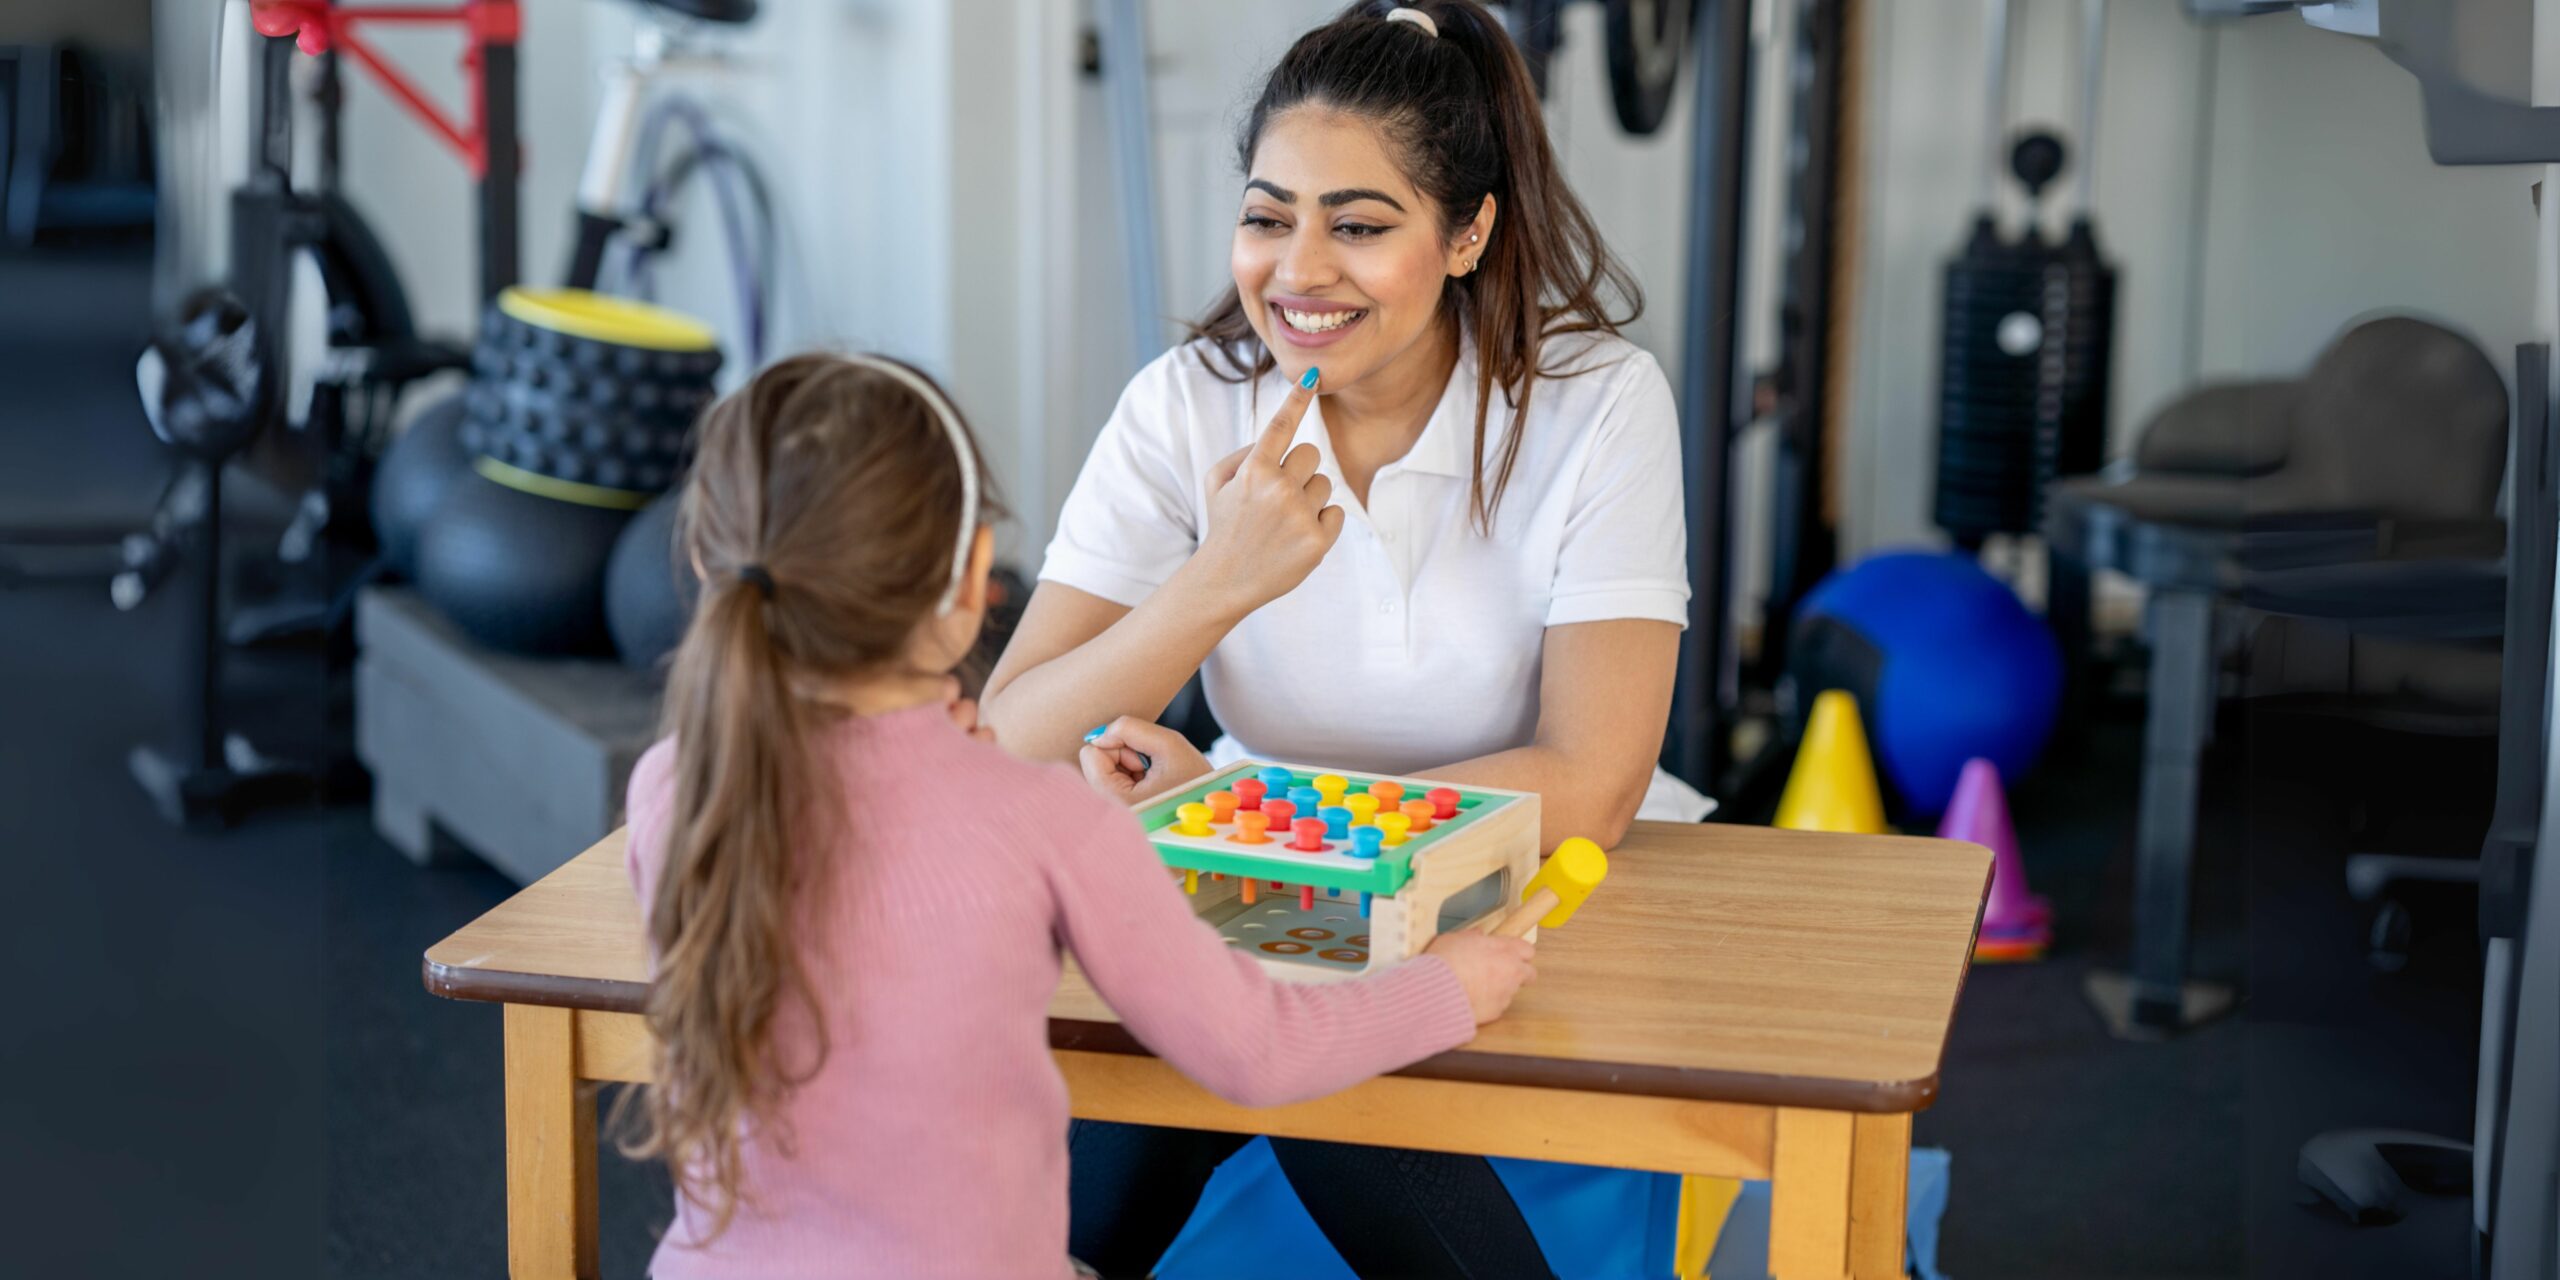 This is an image of a speech therapist working with a child during a speech therapy session, focusing on speech and language development.